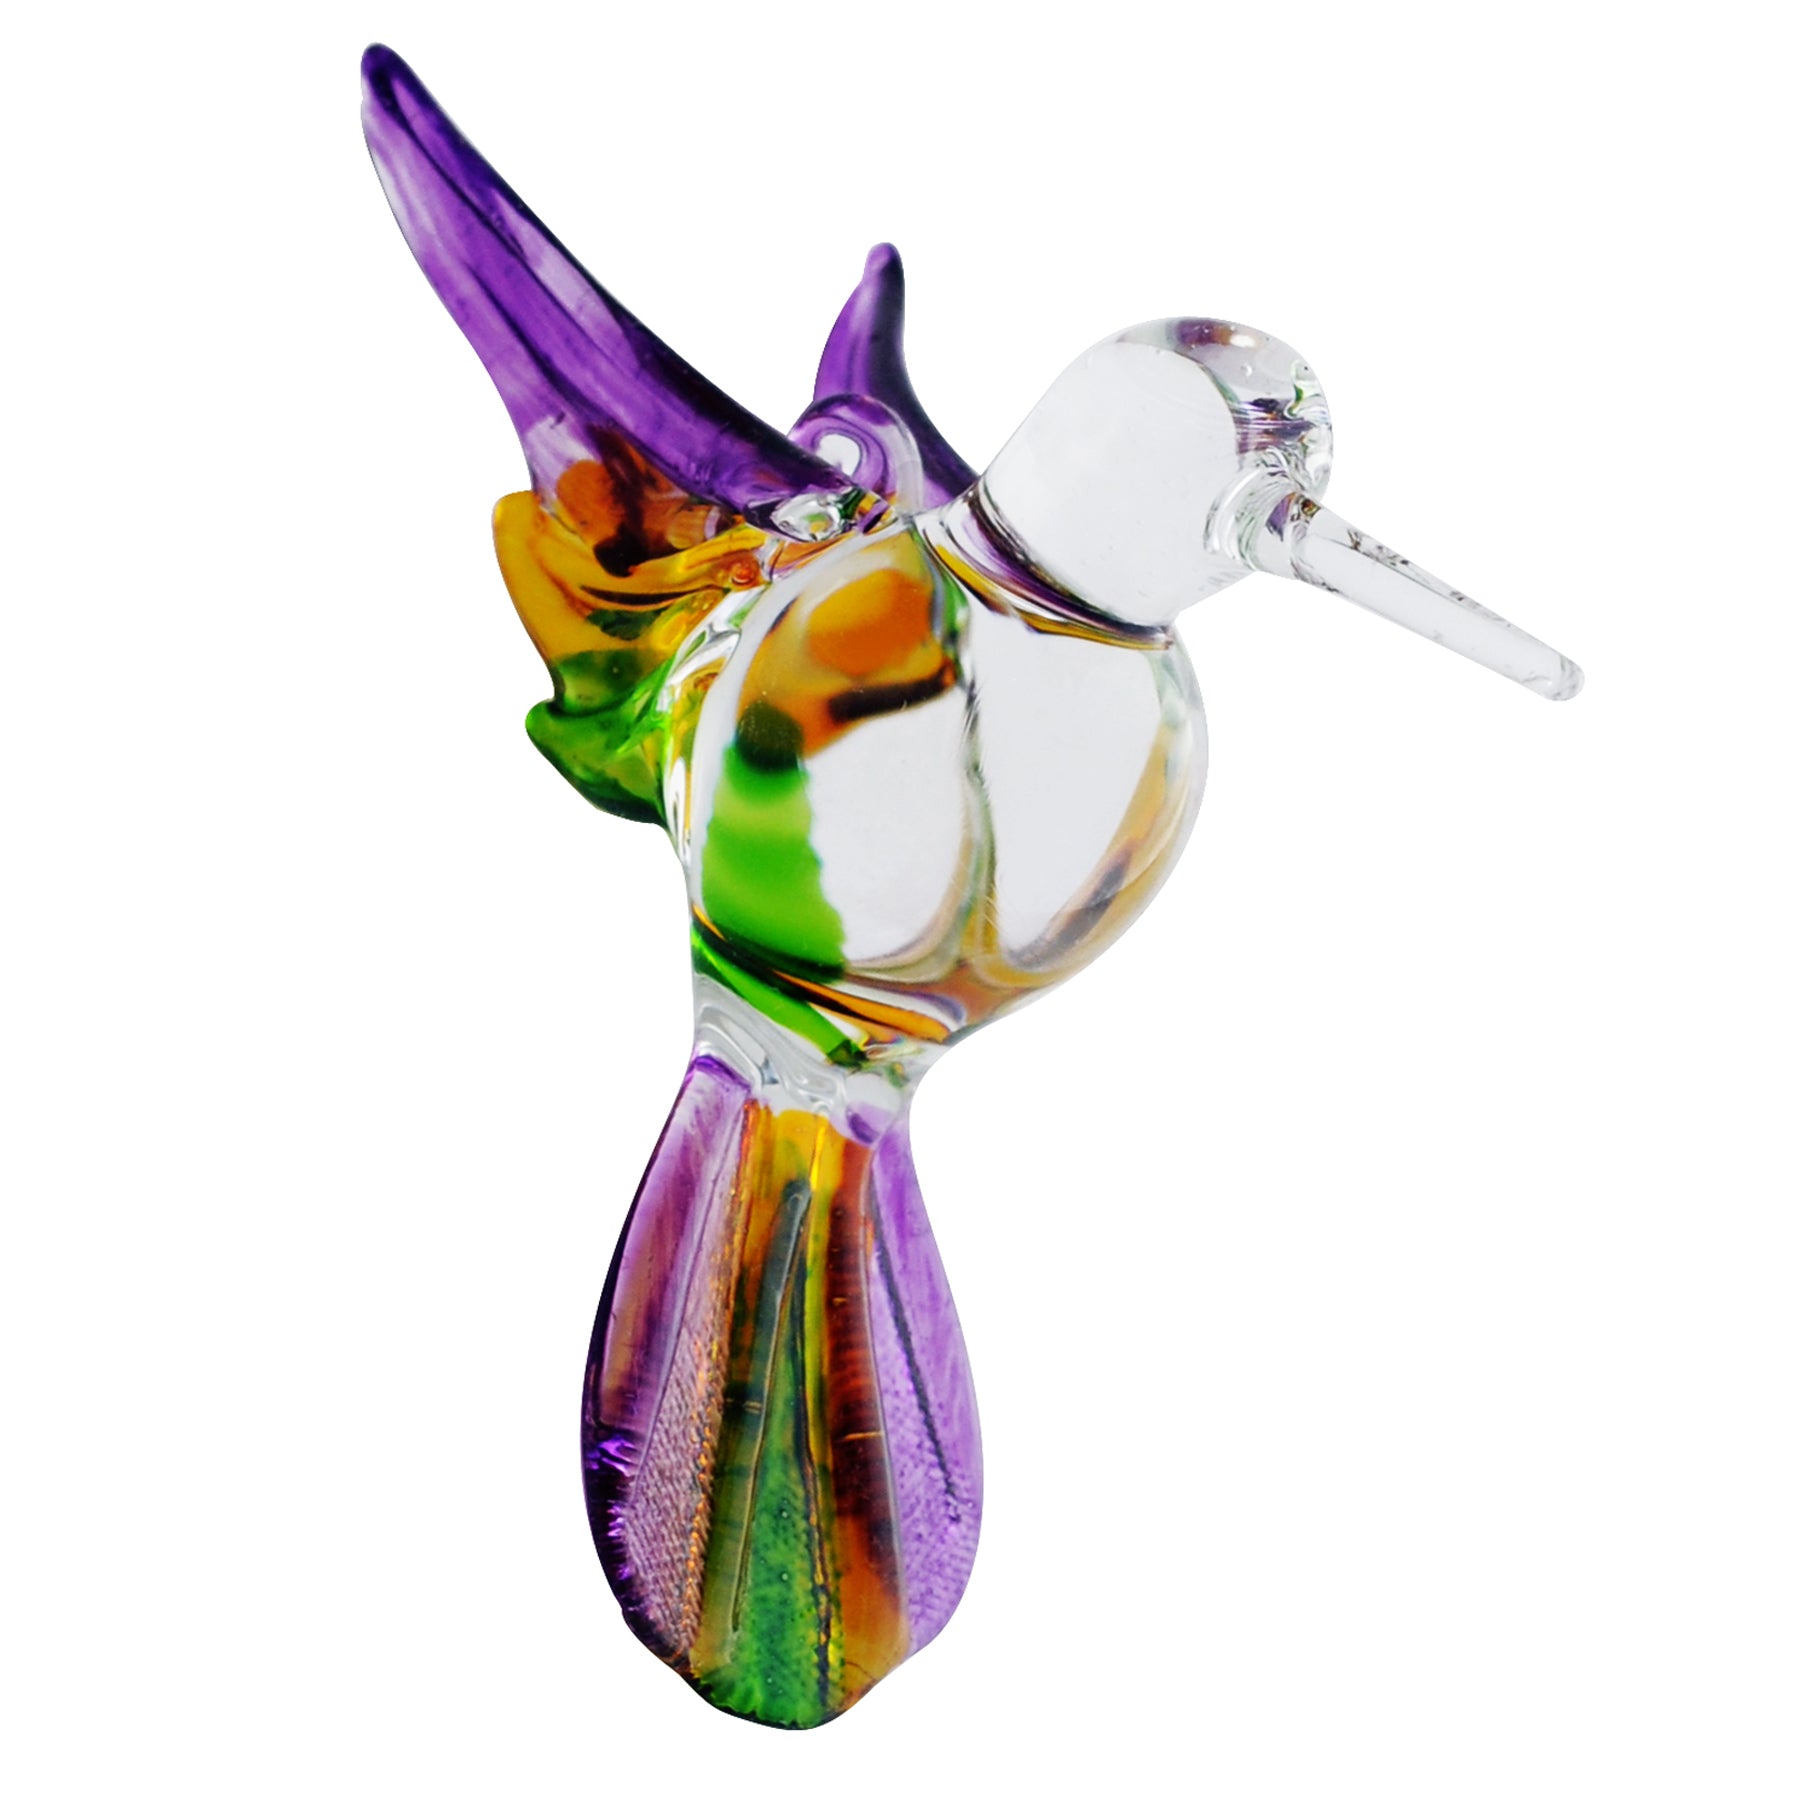 Crystal Castle Glass Multi-Colored Hummingbird ornament in Purple with Yellow and Green accents.